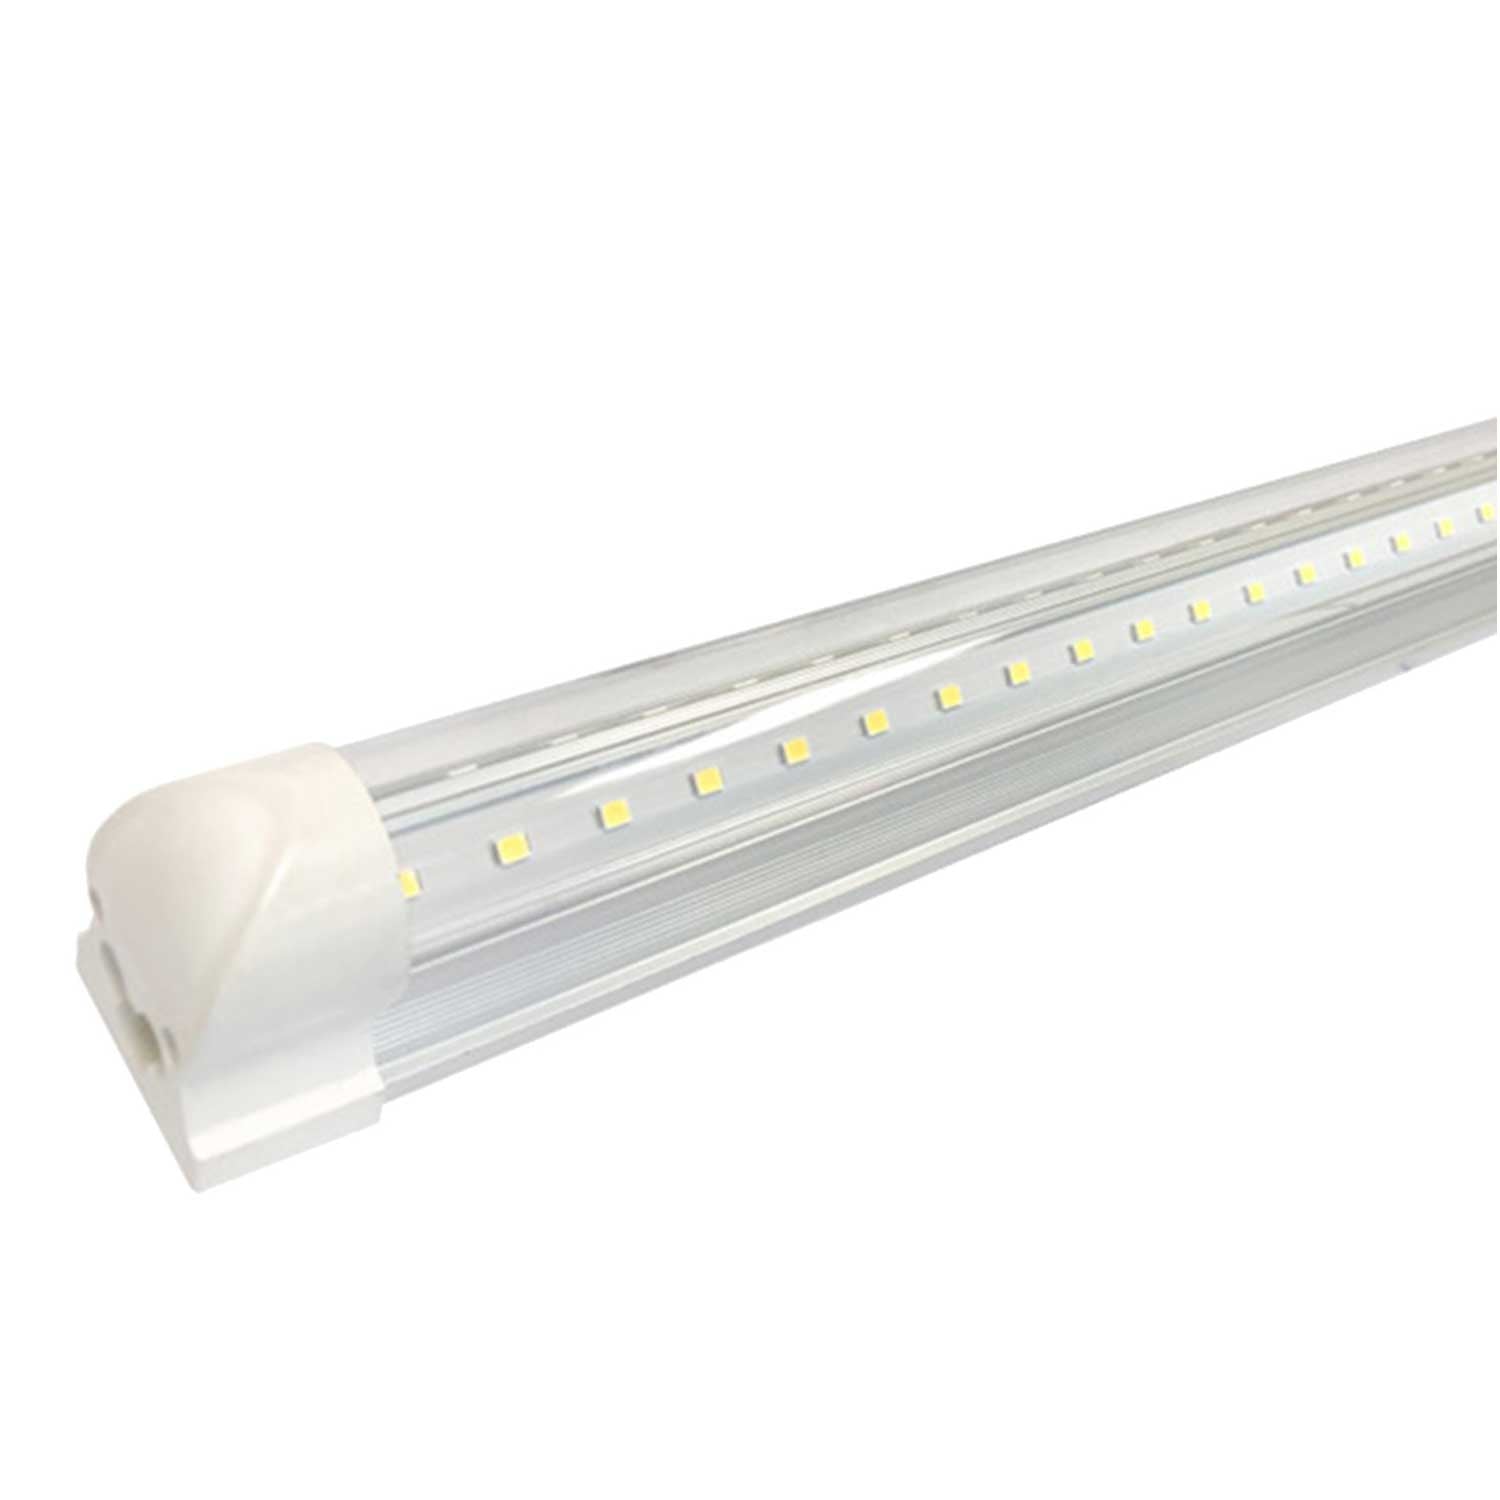 60-Watt T8 8-Foot 8670 lumens Frosted Integrated LED Light Tubes